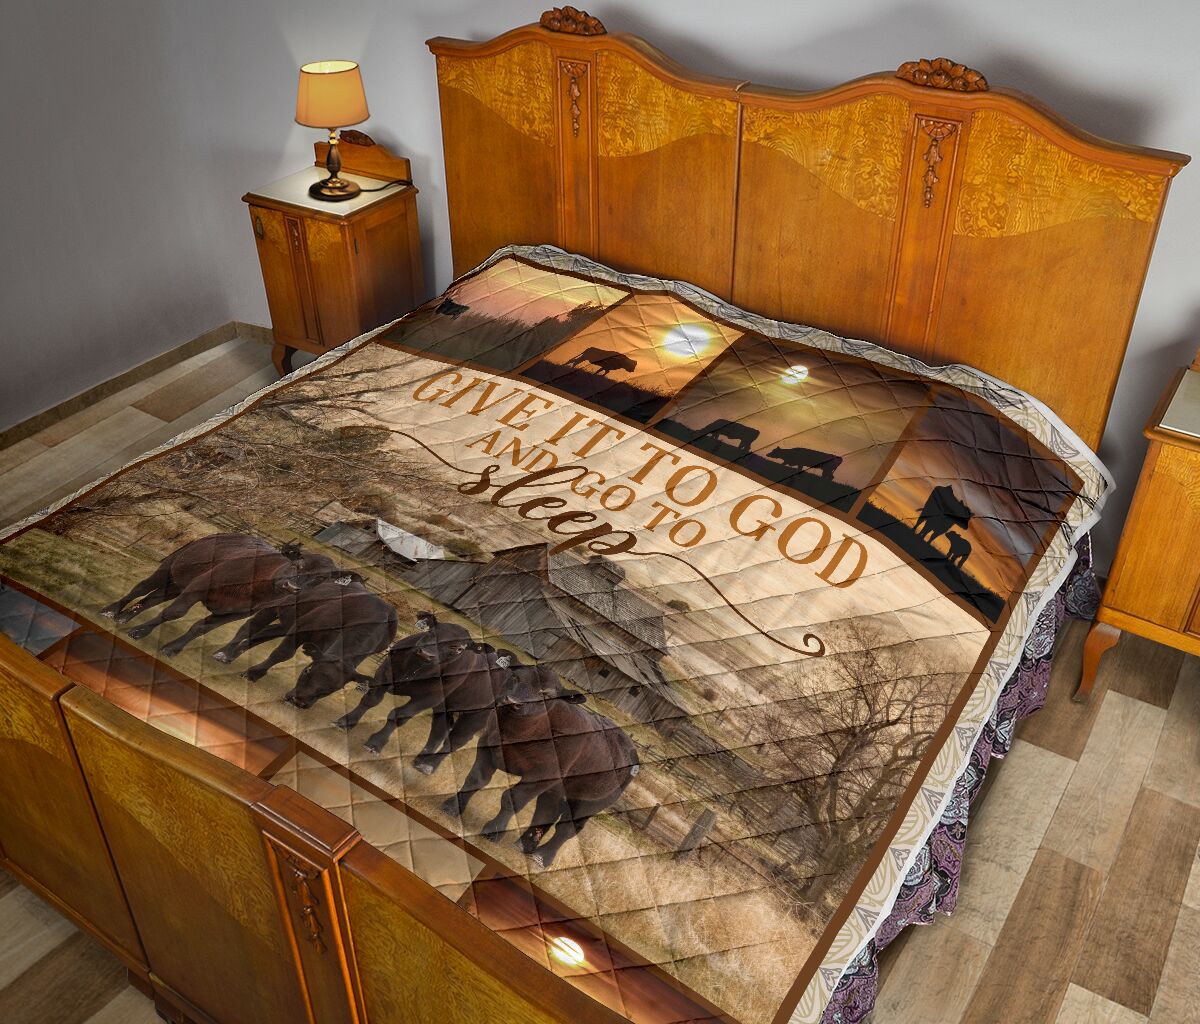 Give it to God and go to sleep farming full printing quilt 3